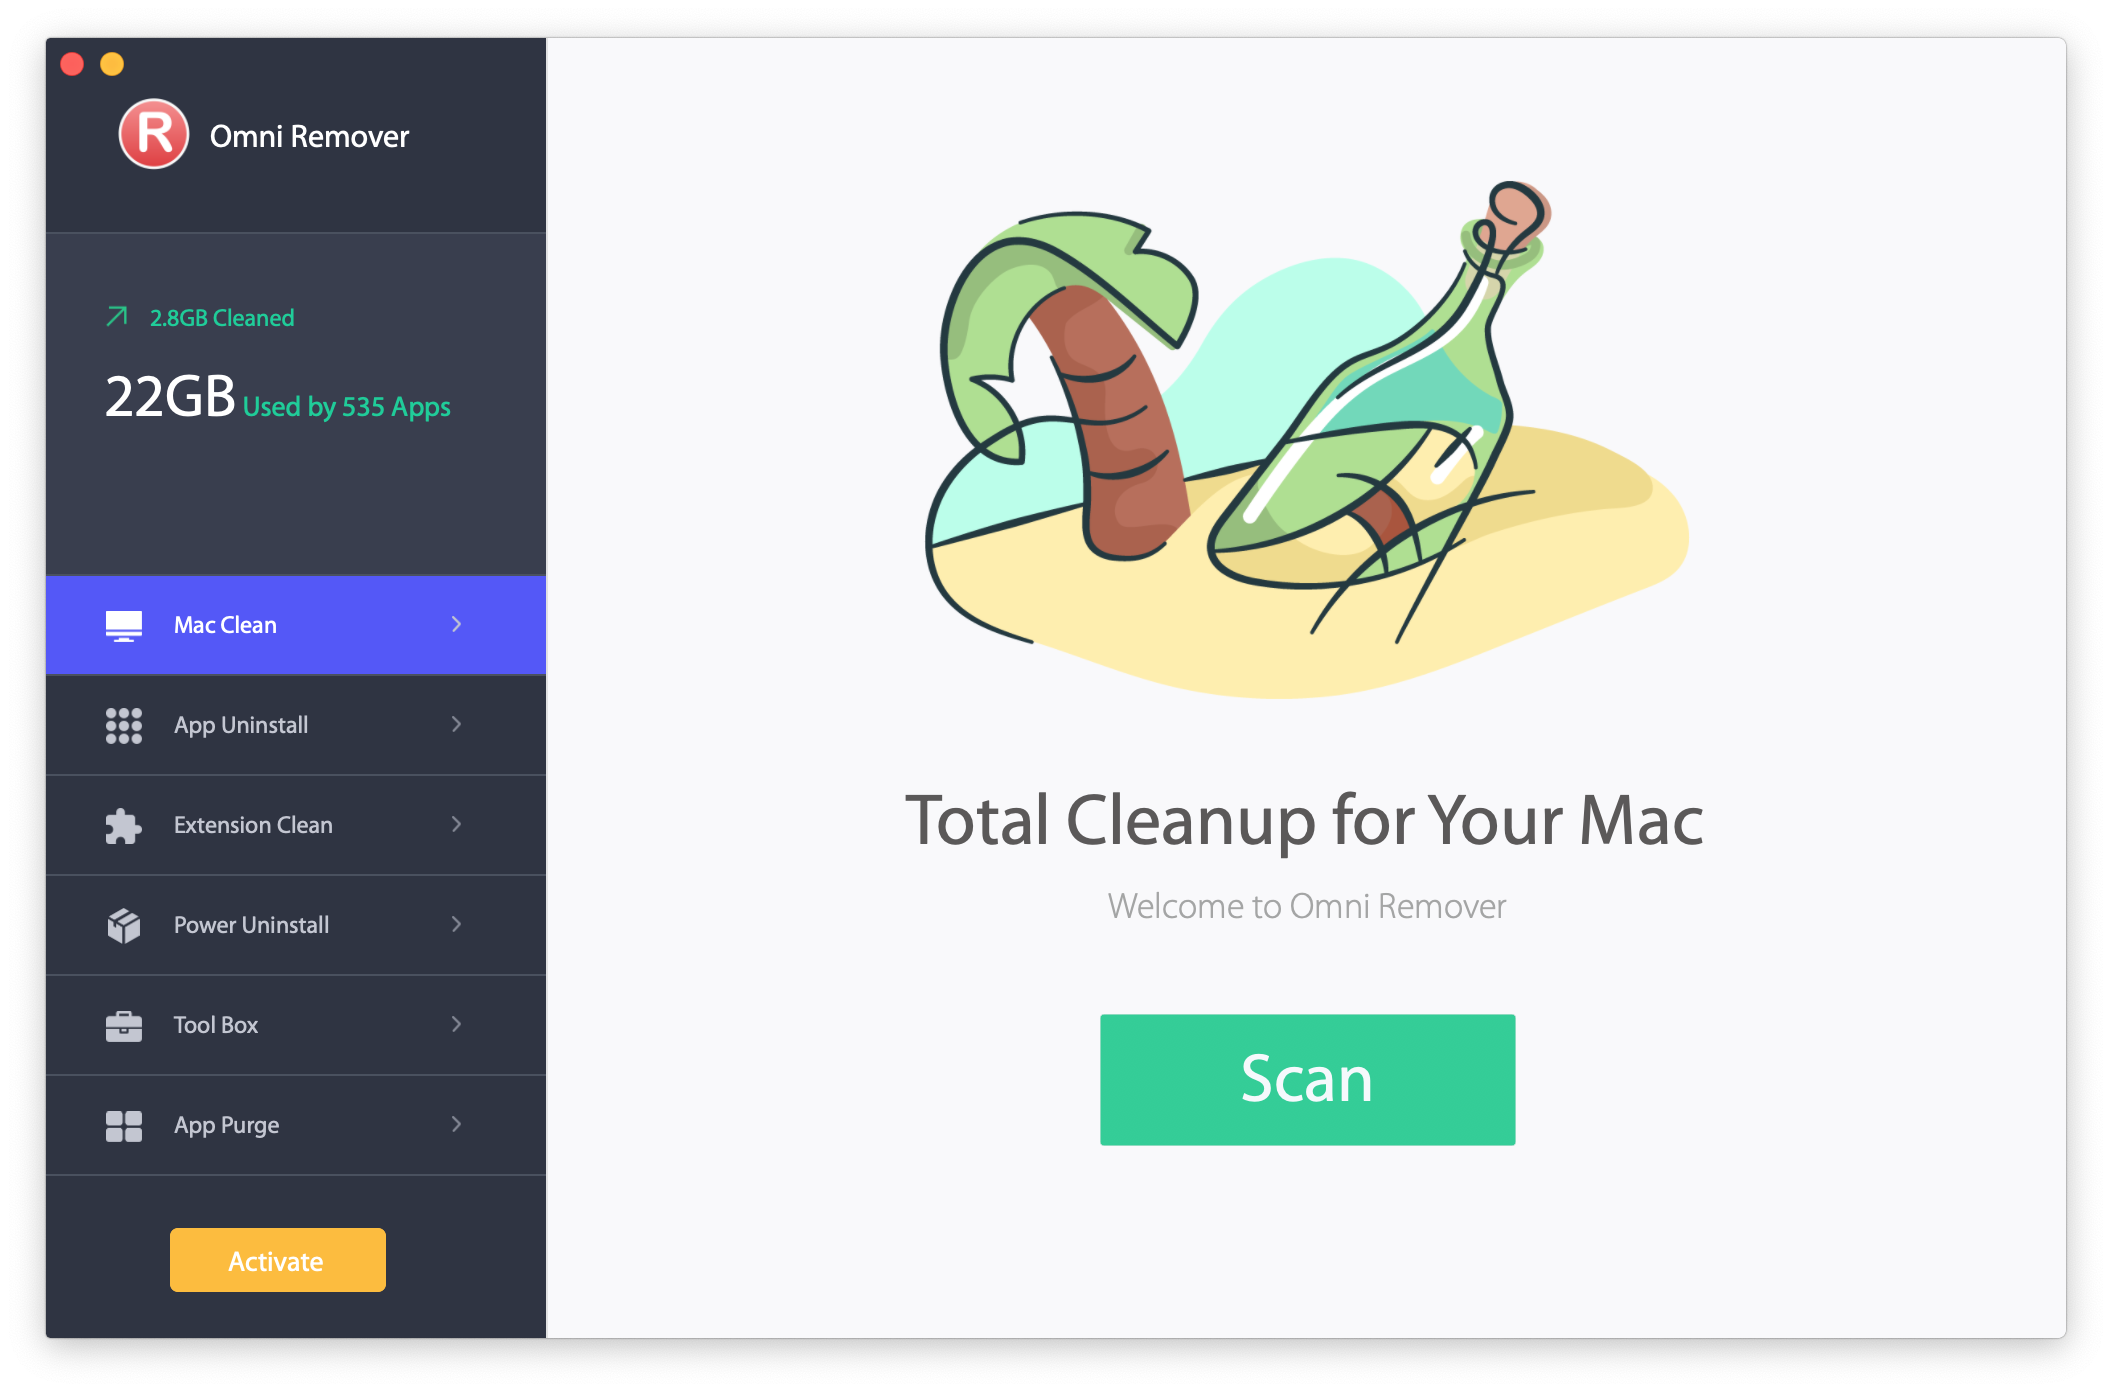 app remover for mac